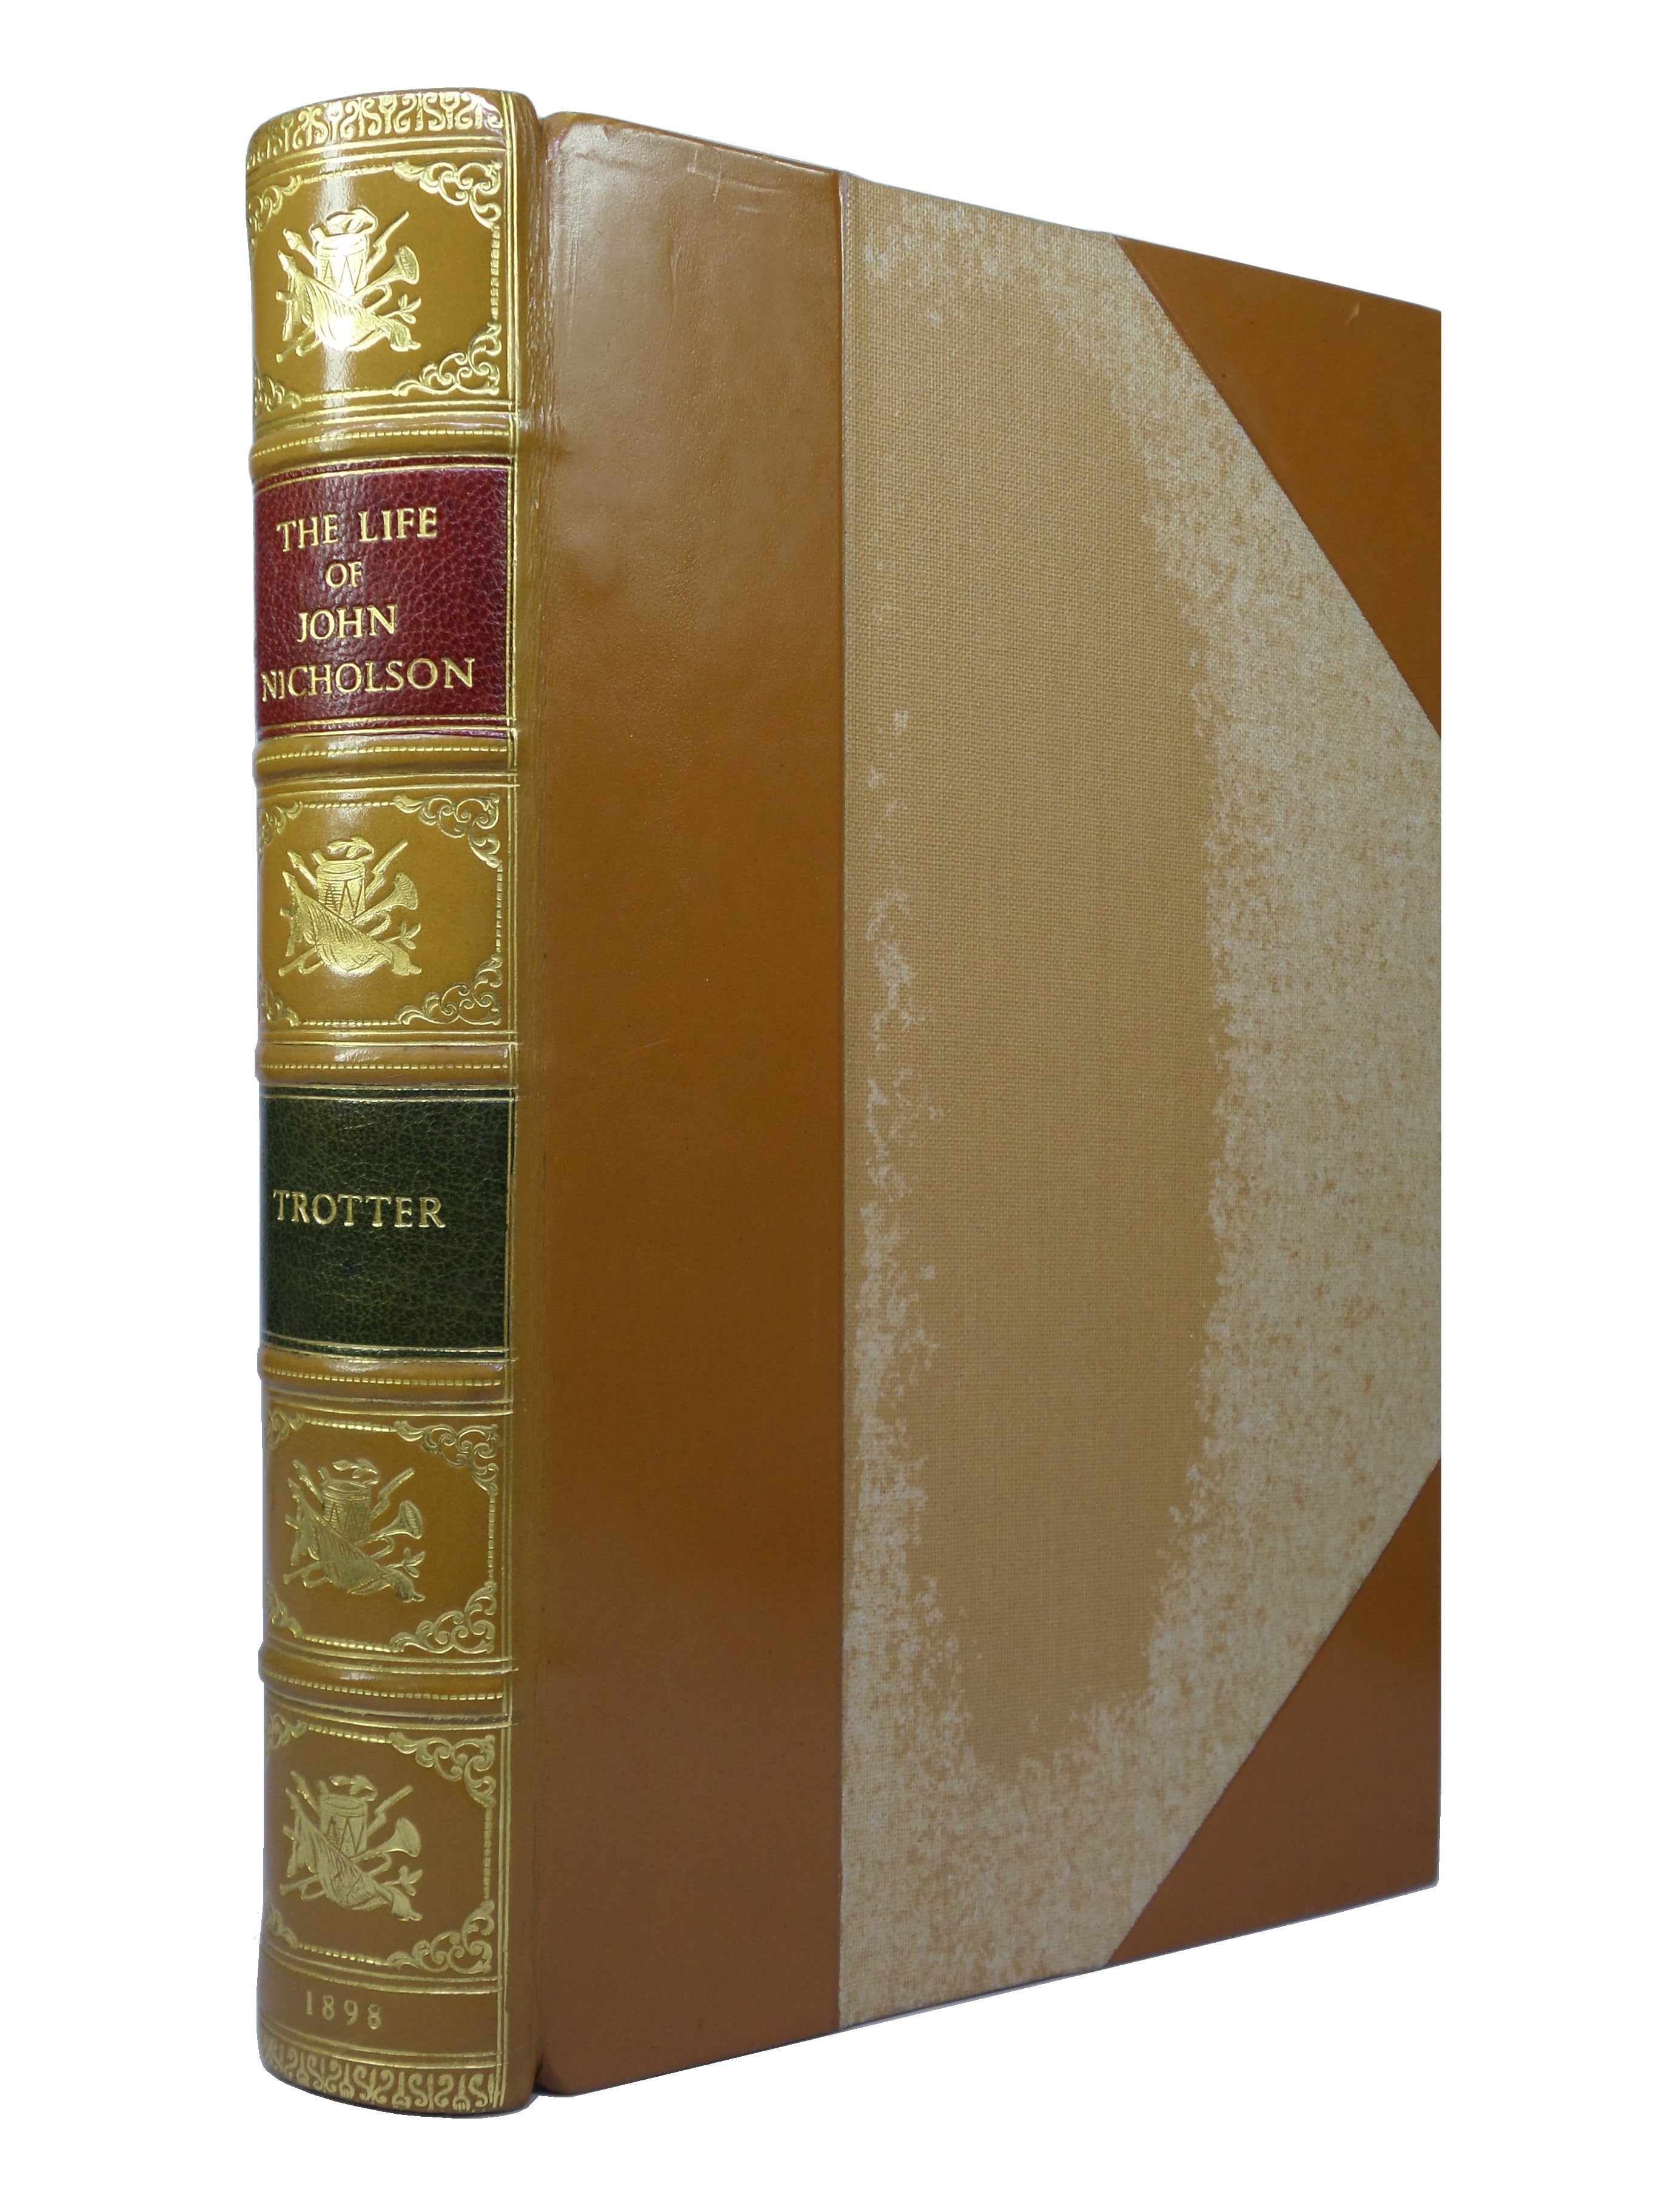 THE LIFE OF JOHN NICHOLSON, SOLDIER AND ADMINISTRATOR BY CAPTAIN LIONEL J. TROTTER 1898 FINELY BOUND BY BAYNTUN-RIVIERE